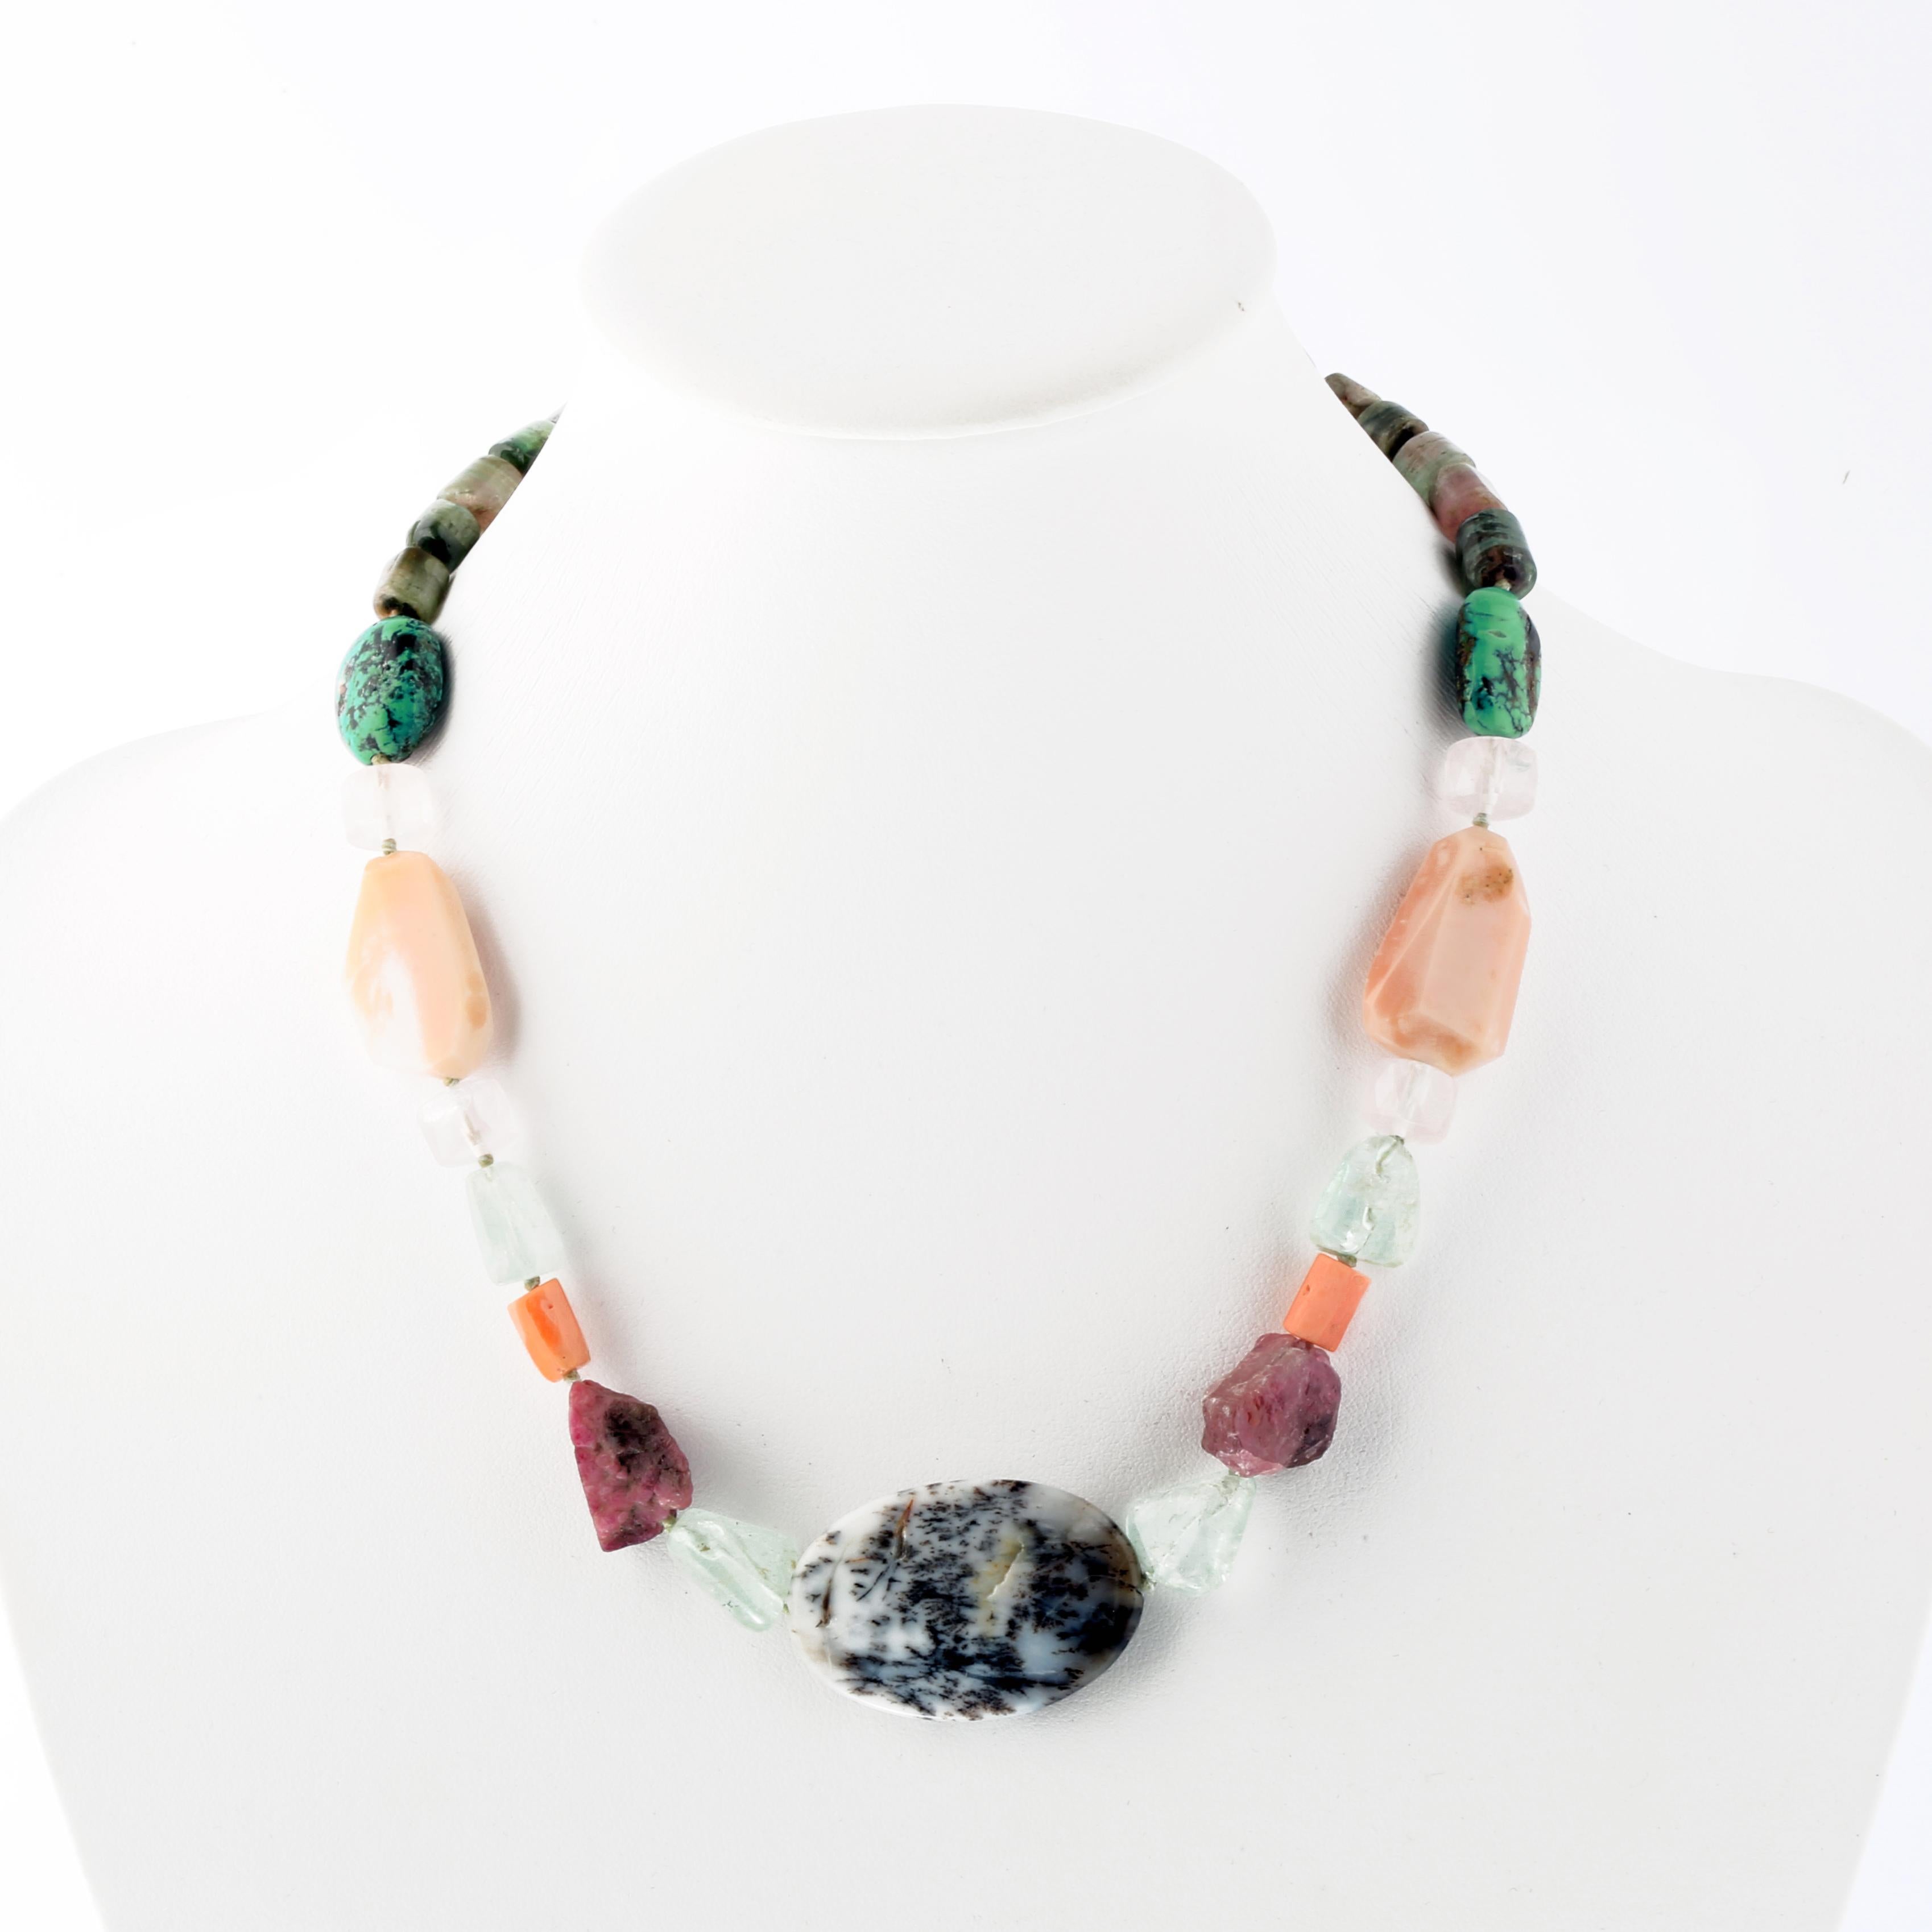 Precious necklace with Natural Gemstones. Abstract jewellery 925 sterling silver piece inspired by the beauty of the diversity, asymmetry and color. Stunning masterpiece with a range of diverse gems and hues that rise into a fantastic beaded, tribal